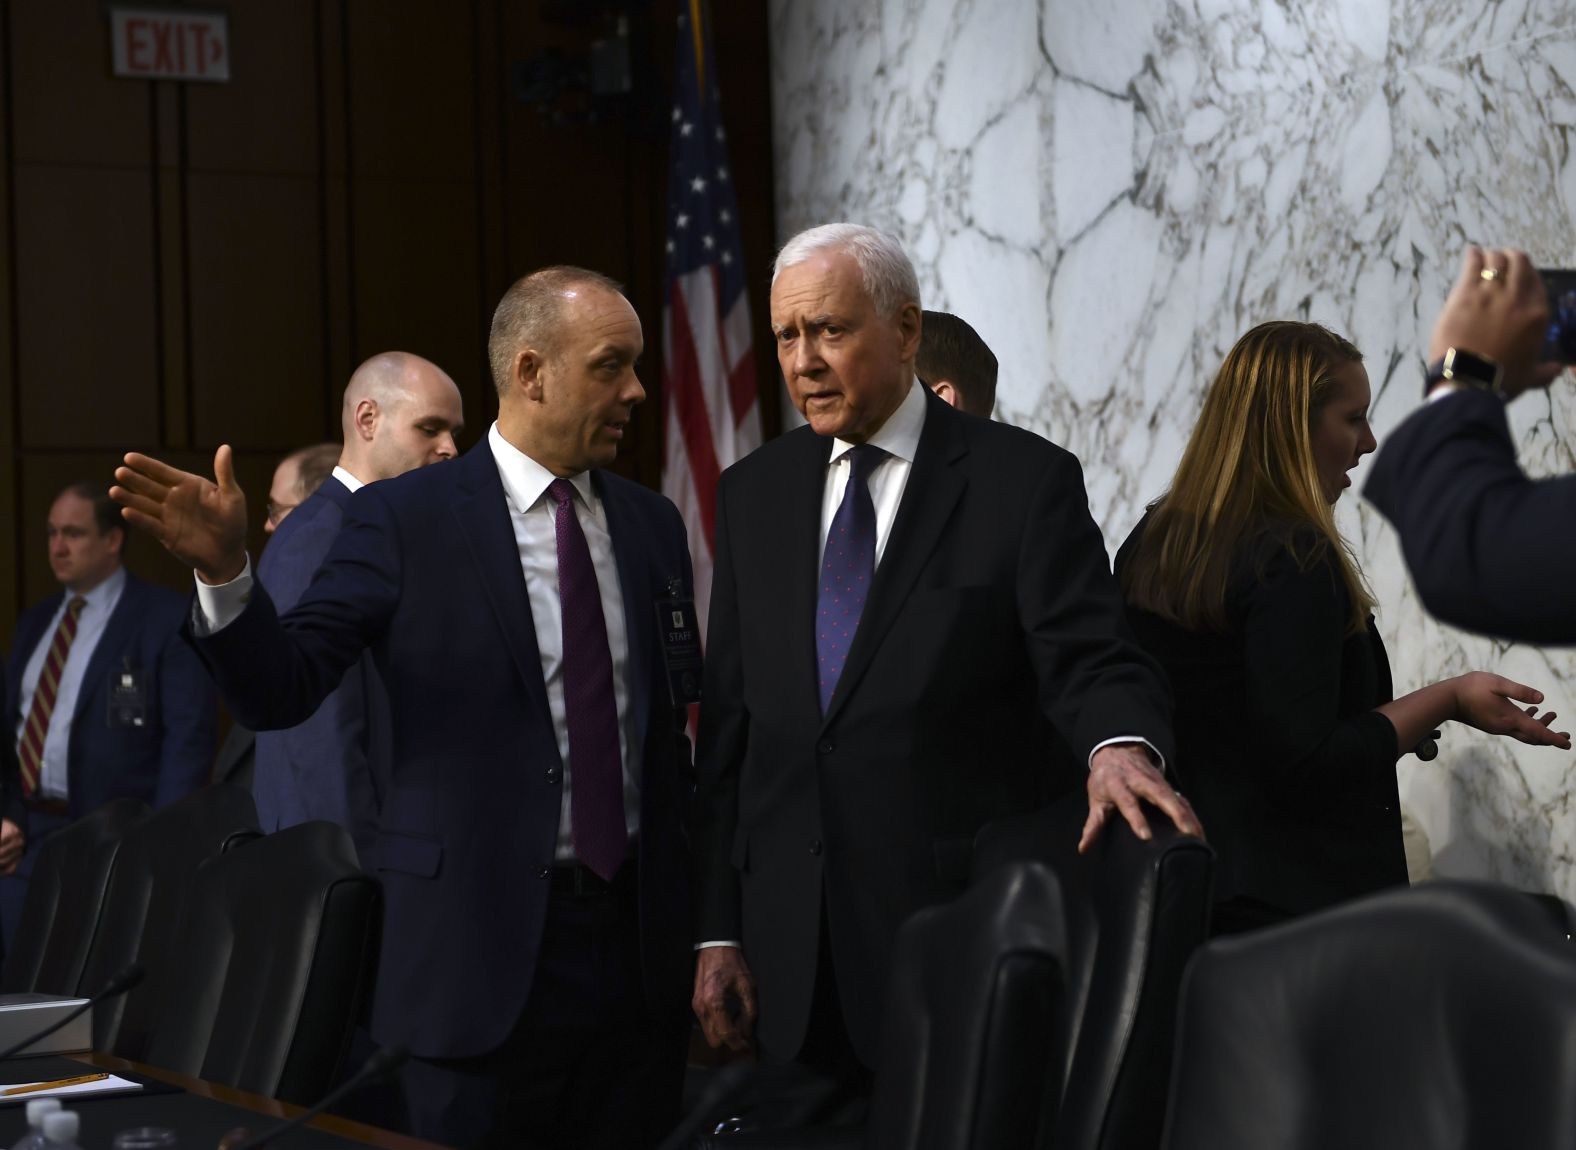 Sen. Orrin Hatch, a Republican member of the Senate Judiciary Committee, arrives on Tuesday.